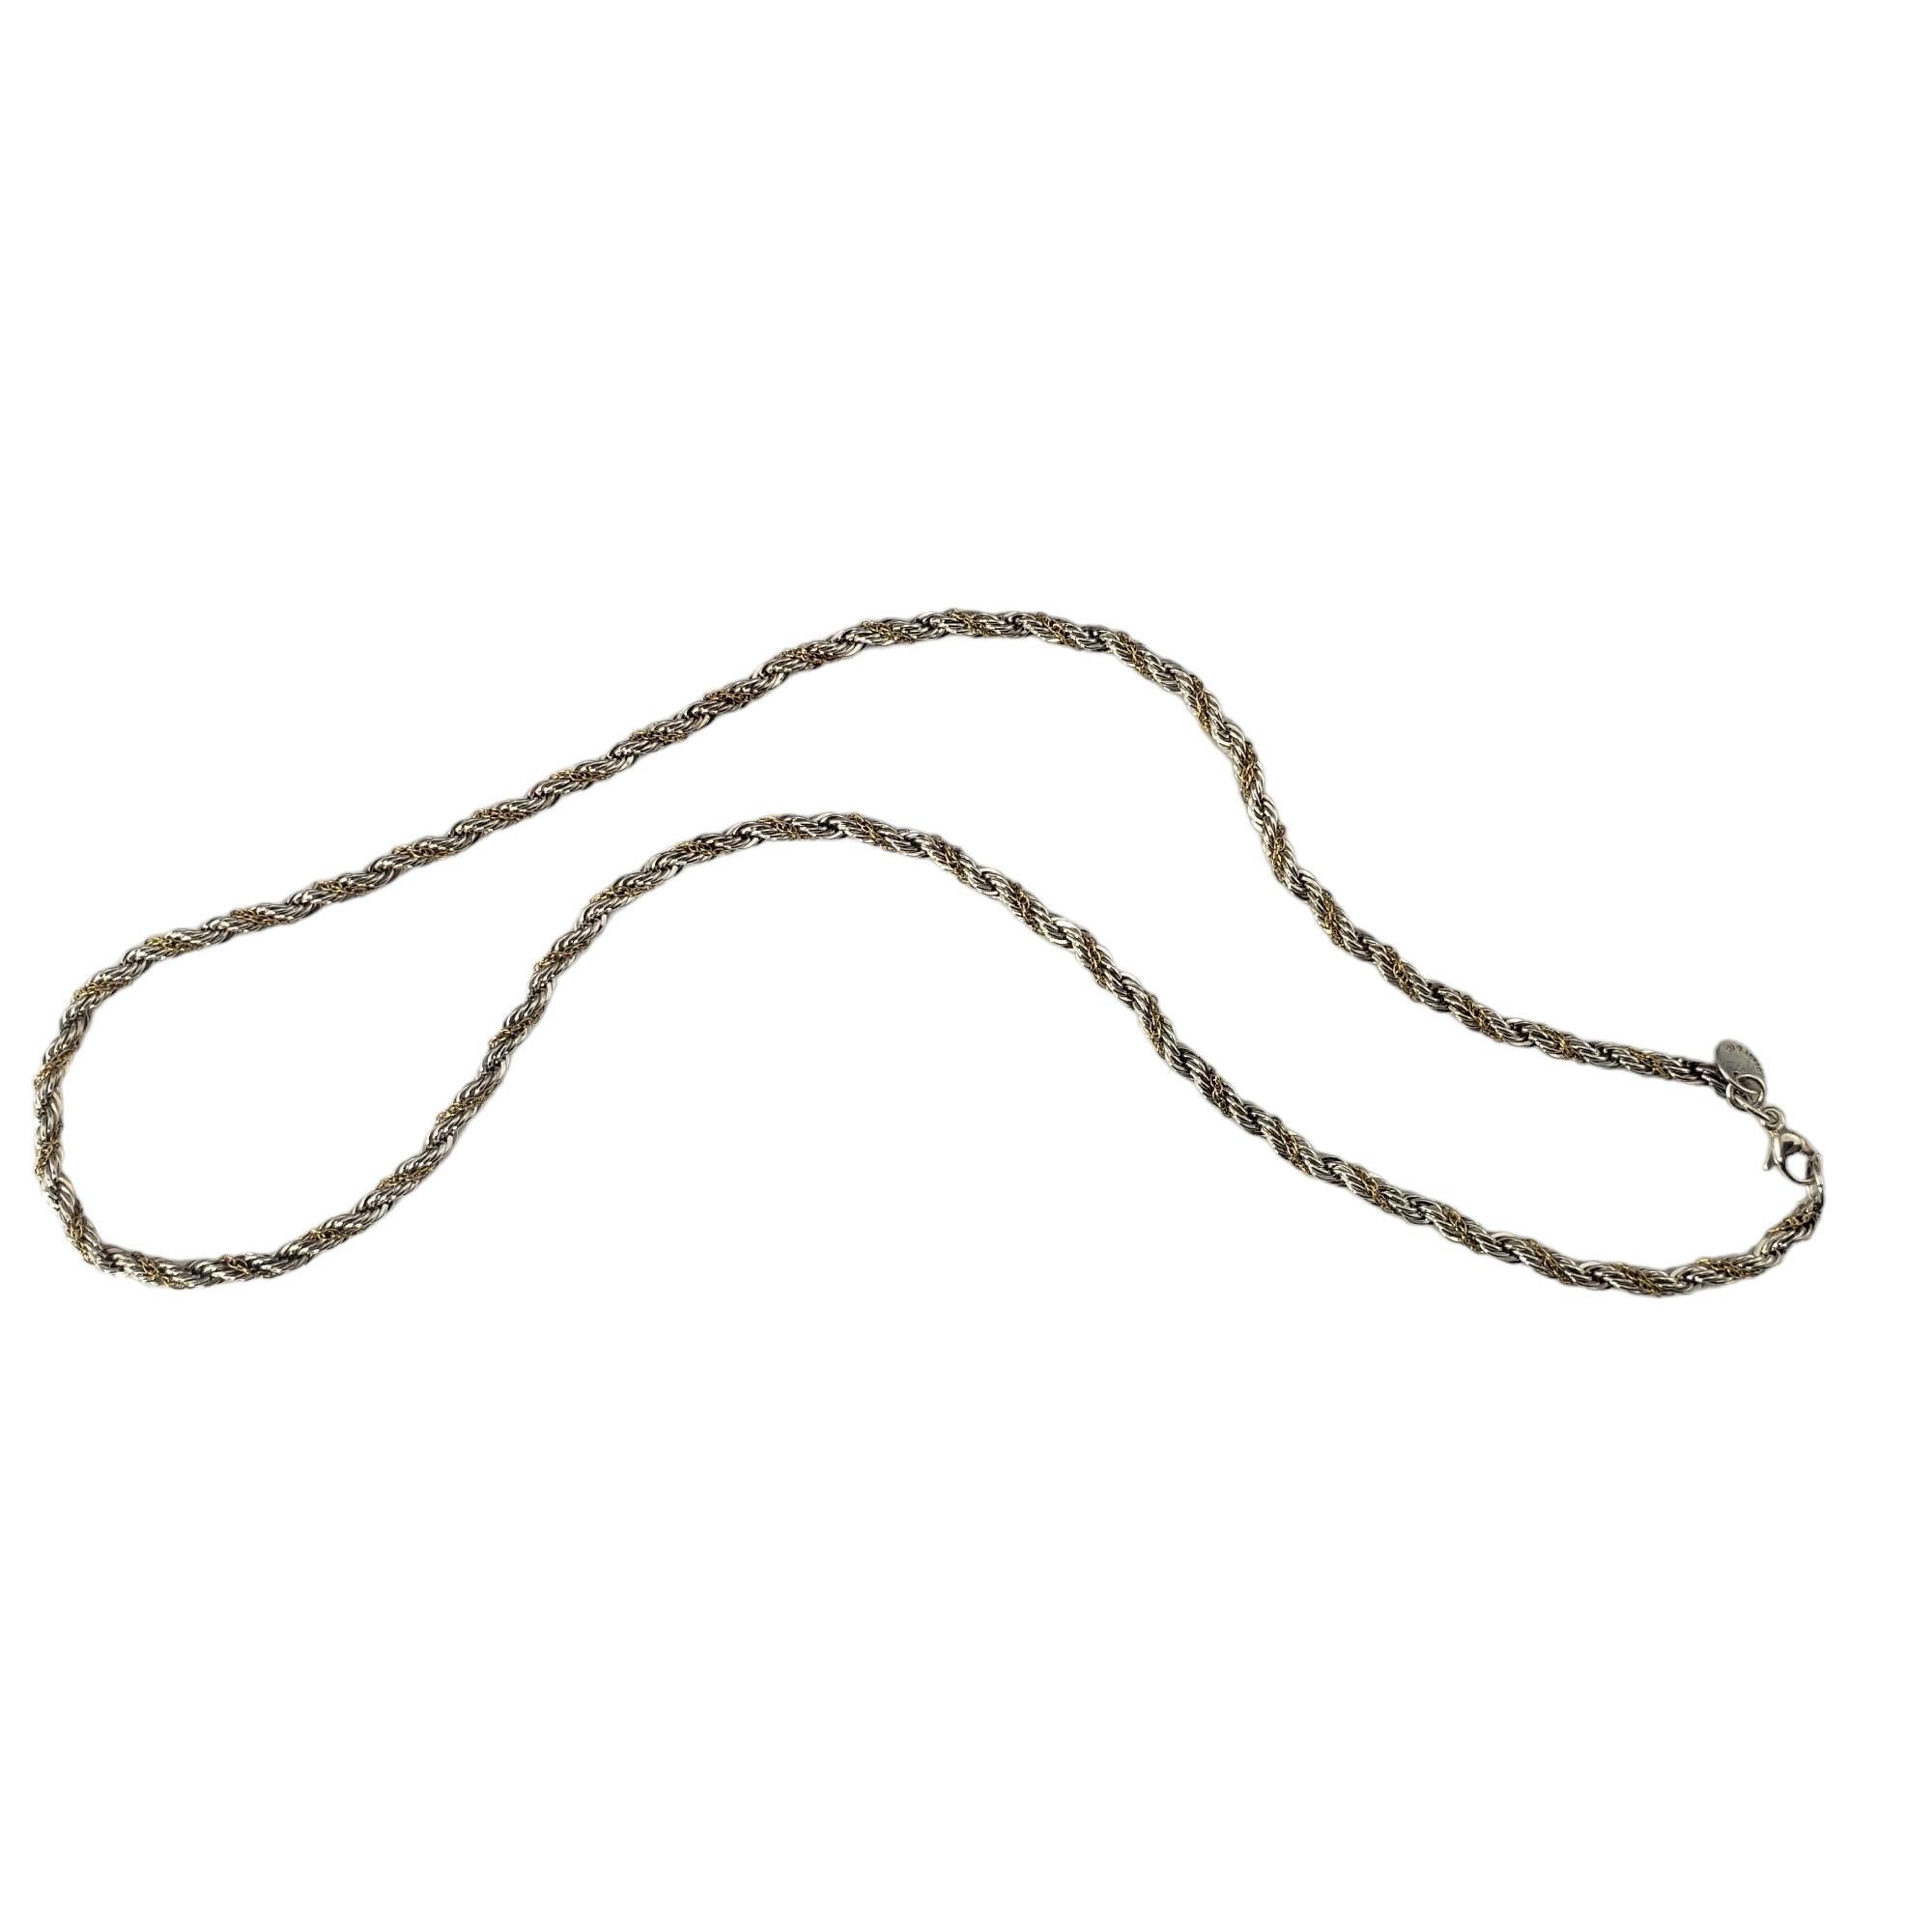 Tiffany & Co. Sterling Silver 18K Yellow Gold Twisted Rope Necklace-

This elegant rope necklace is crafted in beautifully detailed sterling silver and 18K yellow gold by Tiffany & Co.

Width: 3 mm.

Size: 18 inches

Hallmark: 925  750  Tiffany &